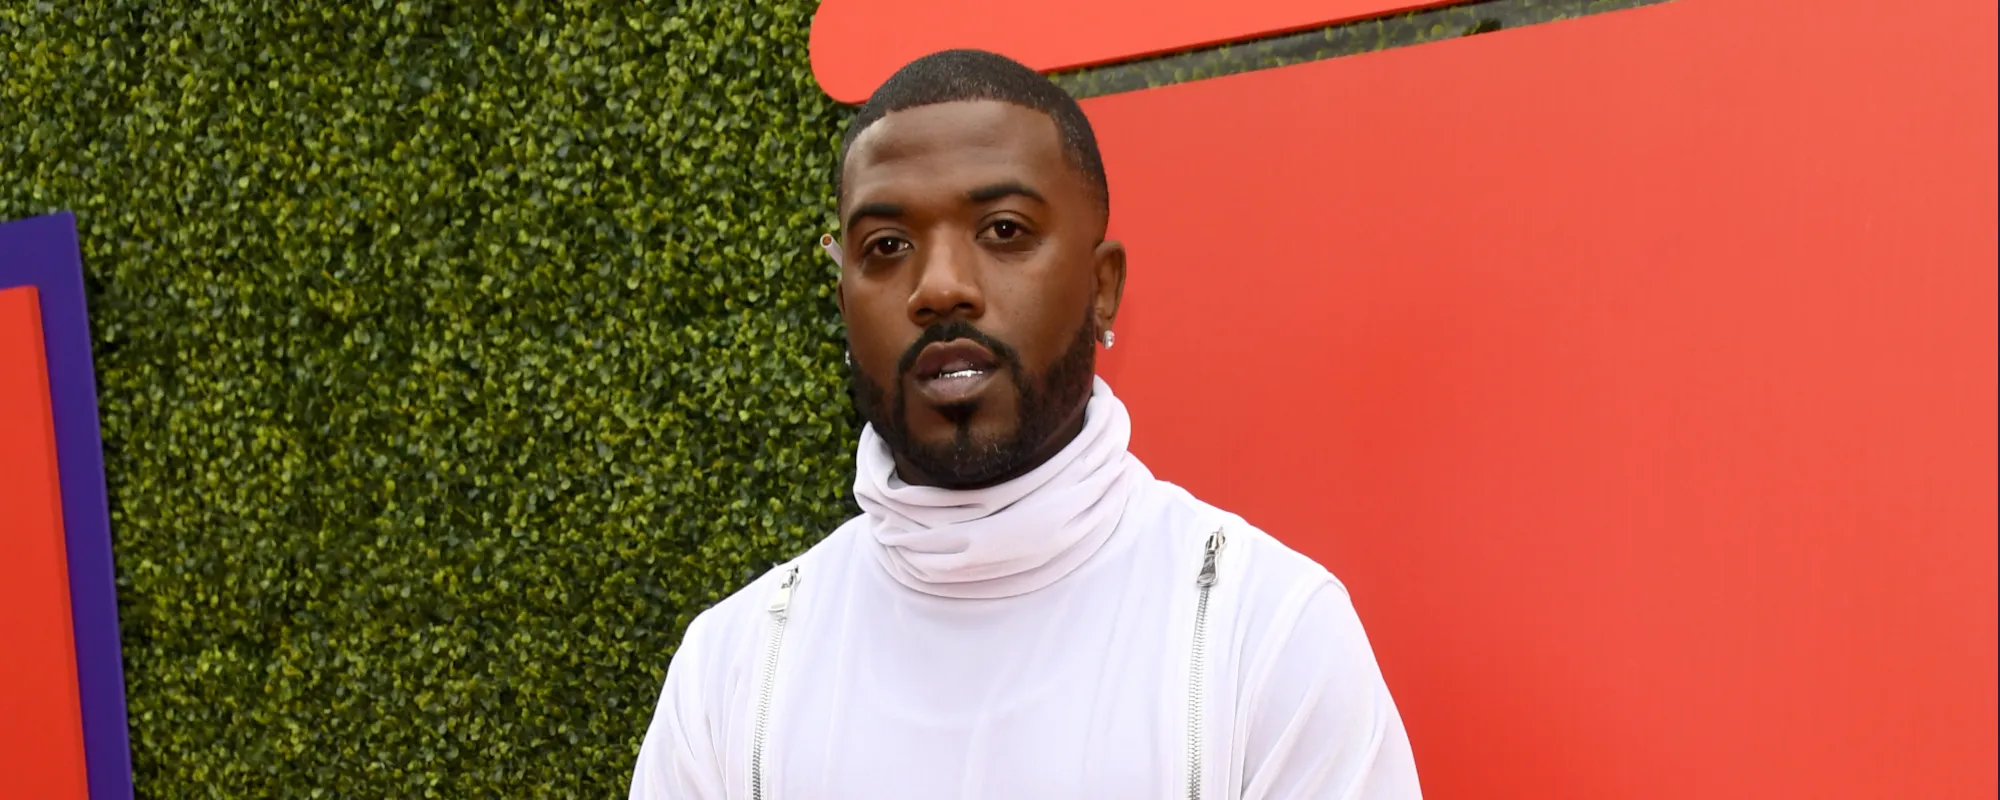 Musician Ray J “Breaks Silence” and Says There is a Second Kim Kardashian Sex Tape—“I Will Not Let Them Do This to Me Anymore”